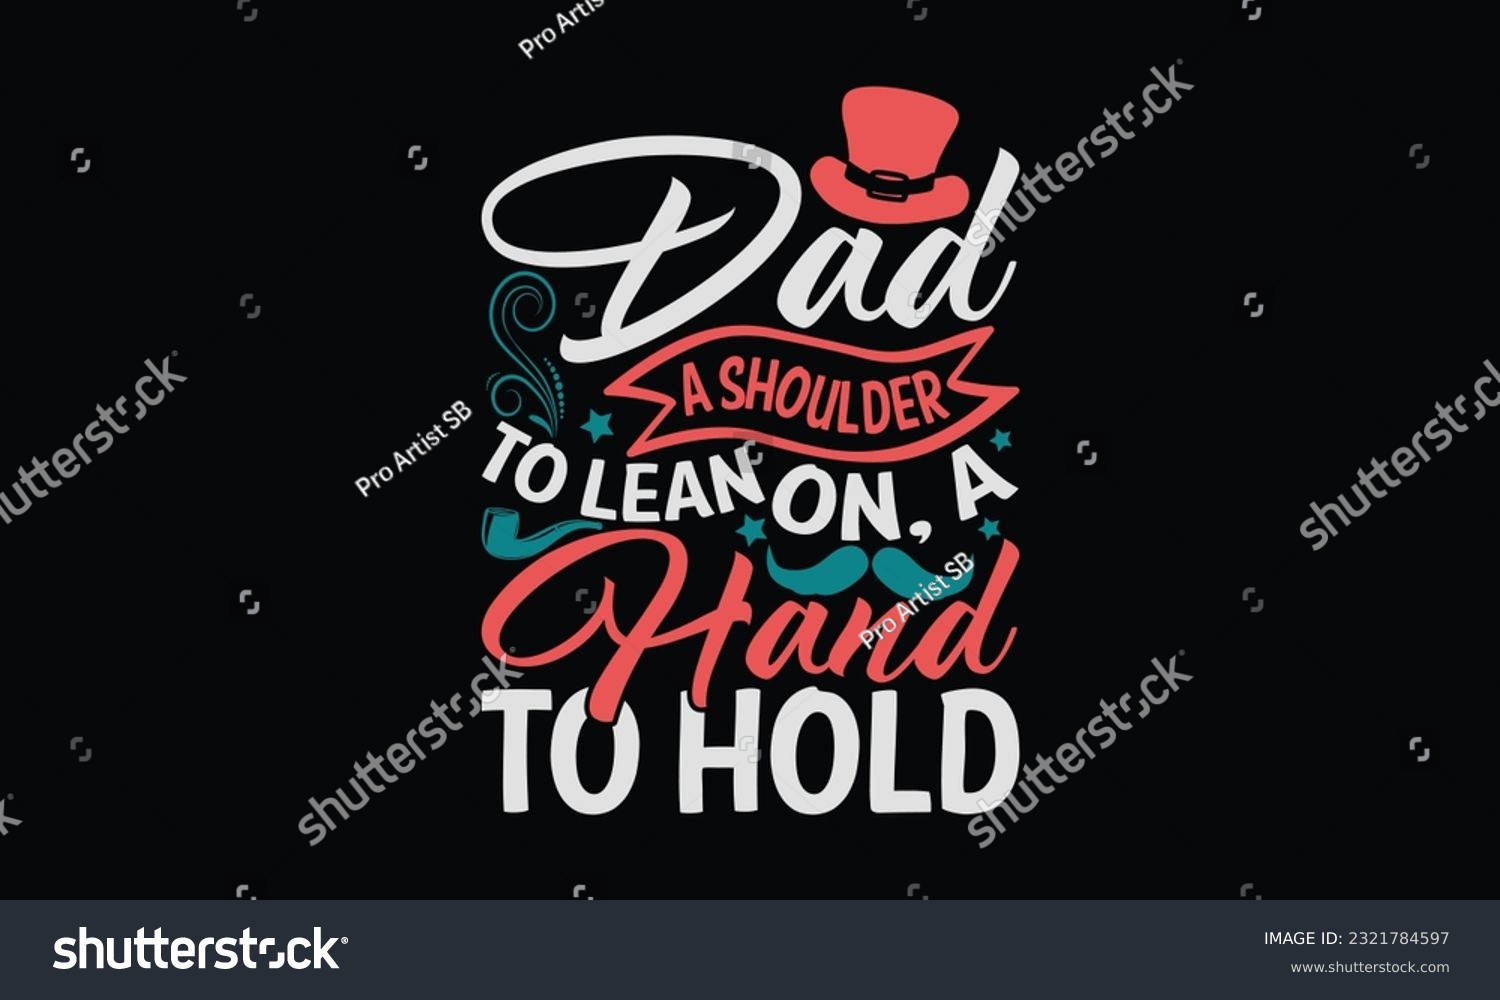 SVG of Dad A Shoulder To Lean On, A Hand To Hold - Father's Day T-Shirt Design, Print On Design For T-Shirts, Sweater, Jumper, Mug, Sticker, Pillow, Poster Cards And Much More. svg